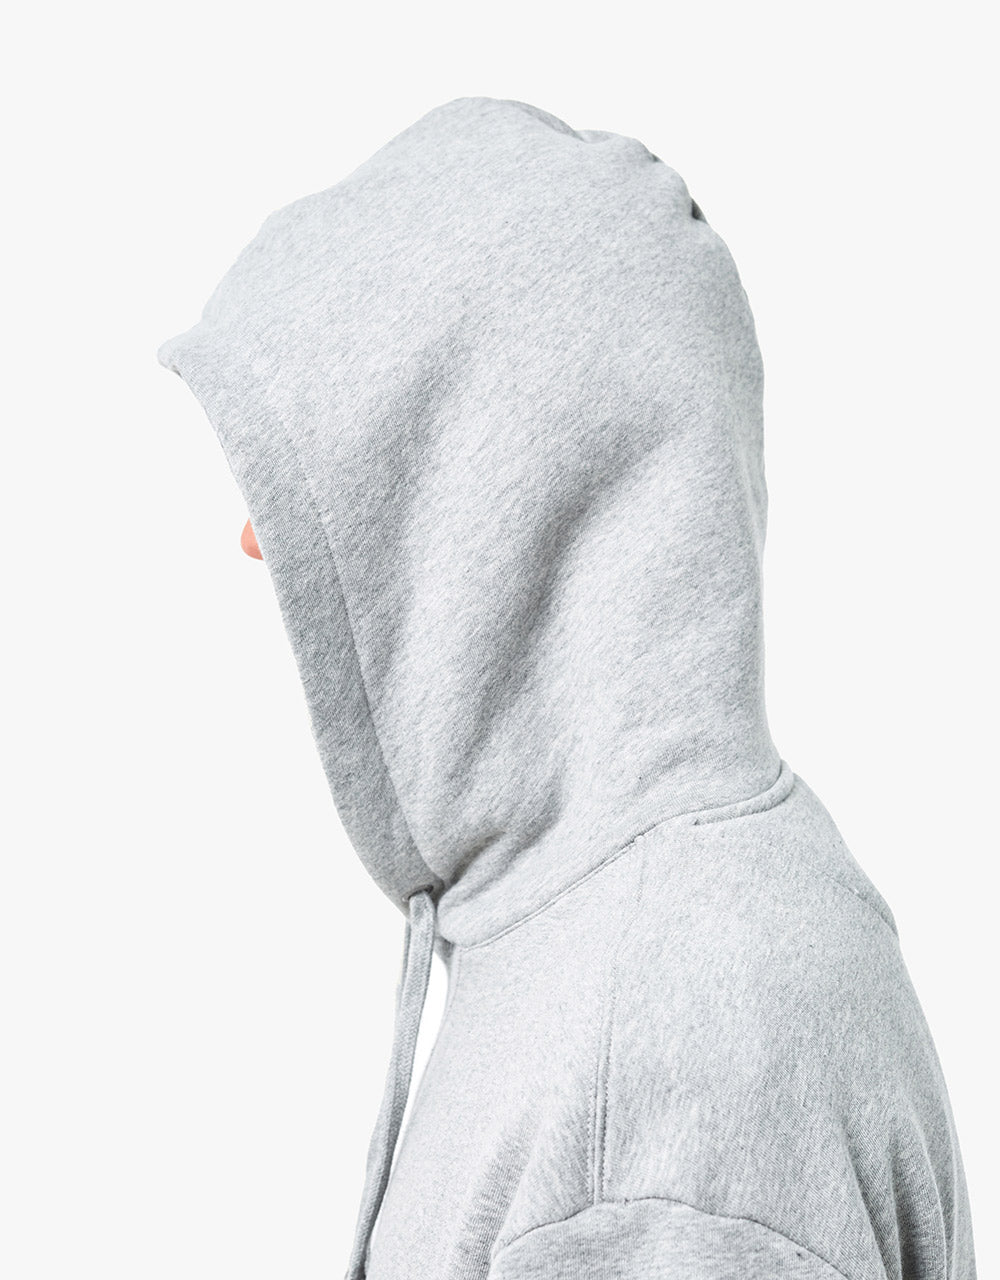 Route One Organic Premium Pullover Hoodie - Heather Grey